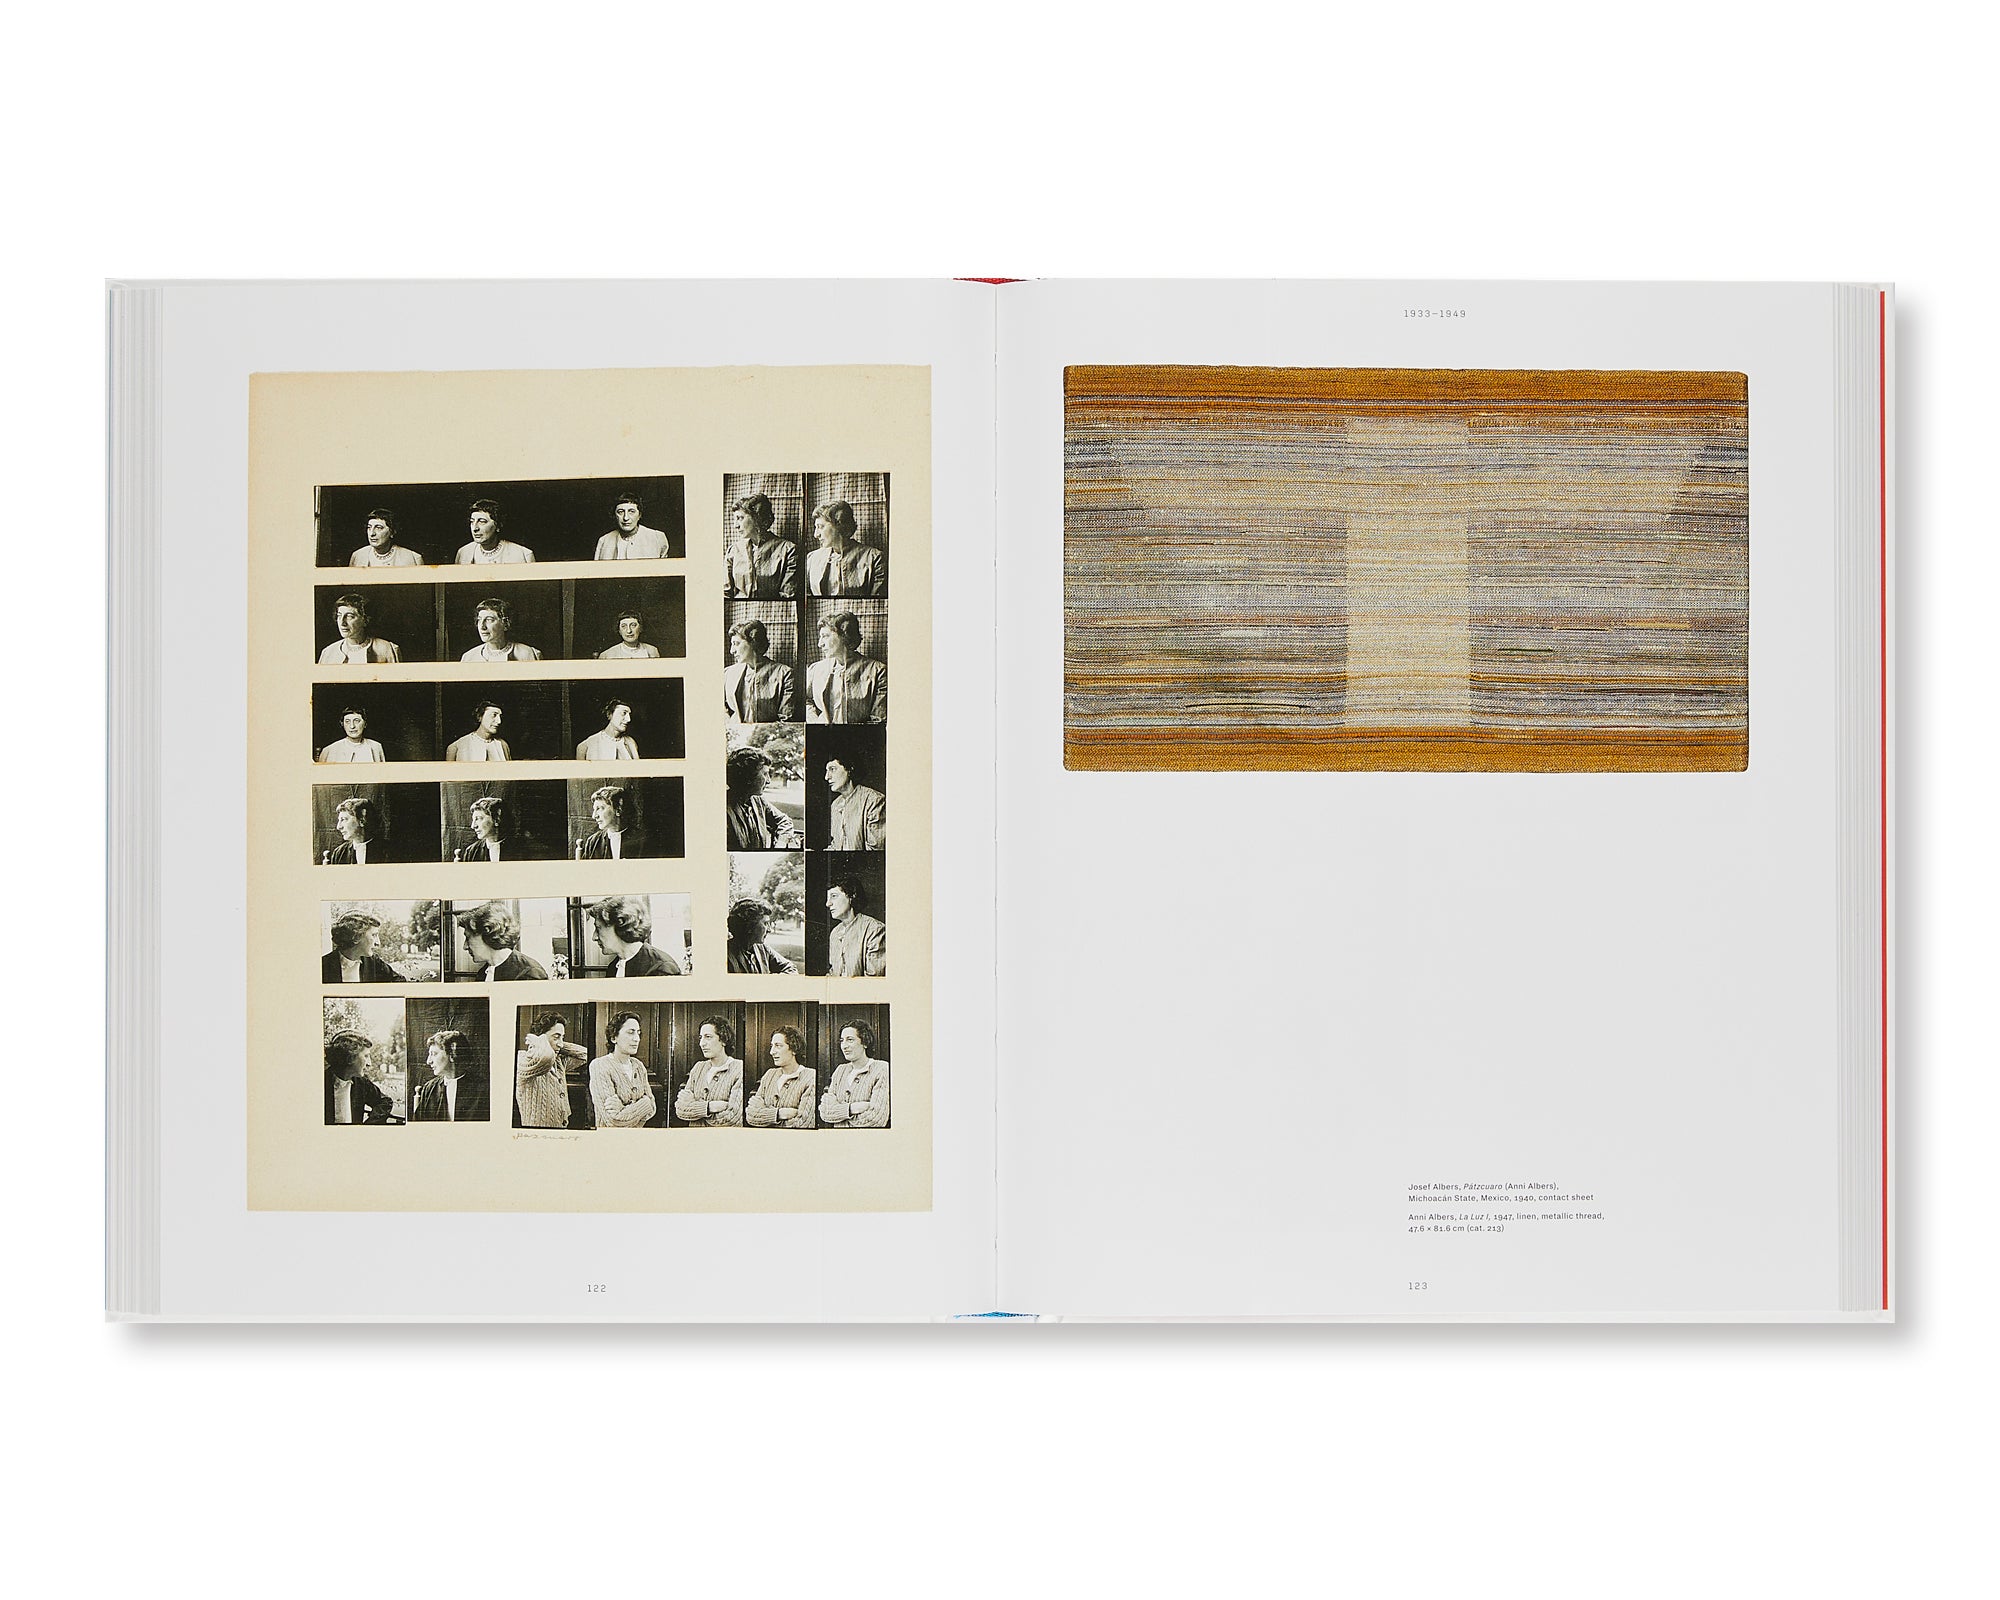 ART AND LIFE by Anni Albers, Josef Albers